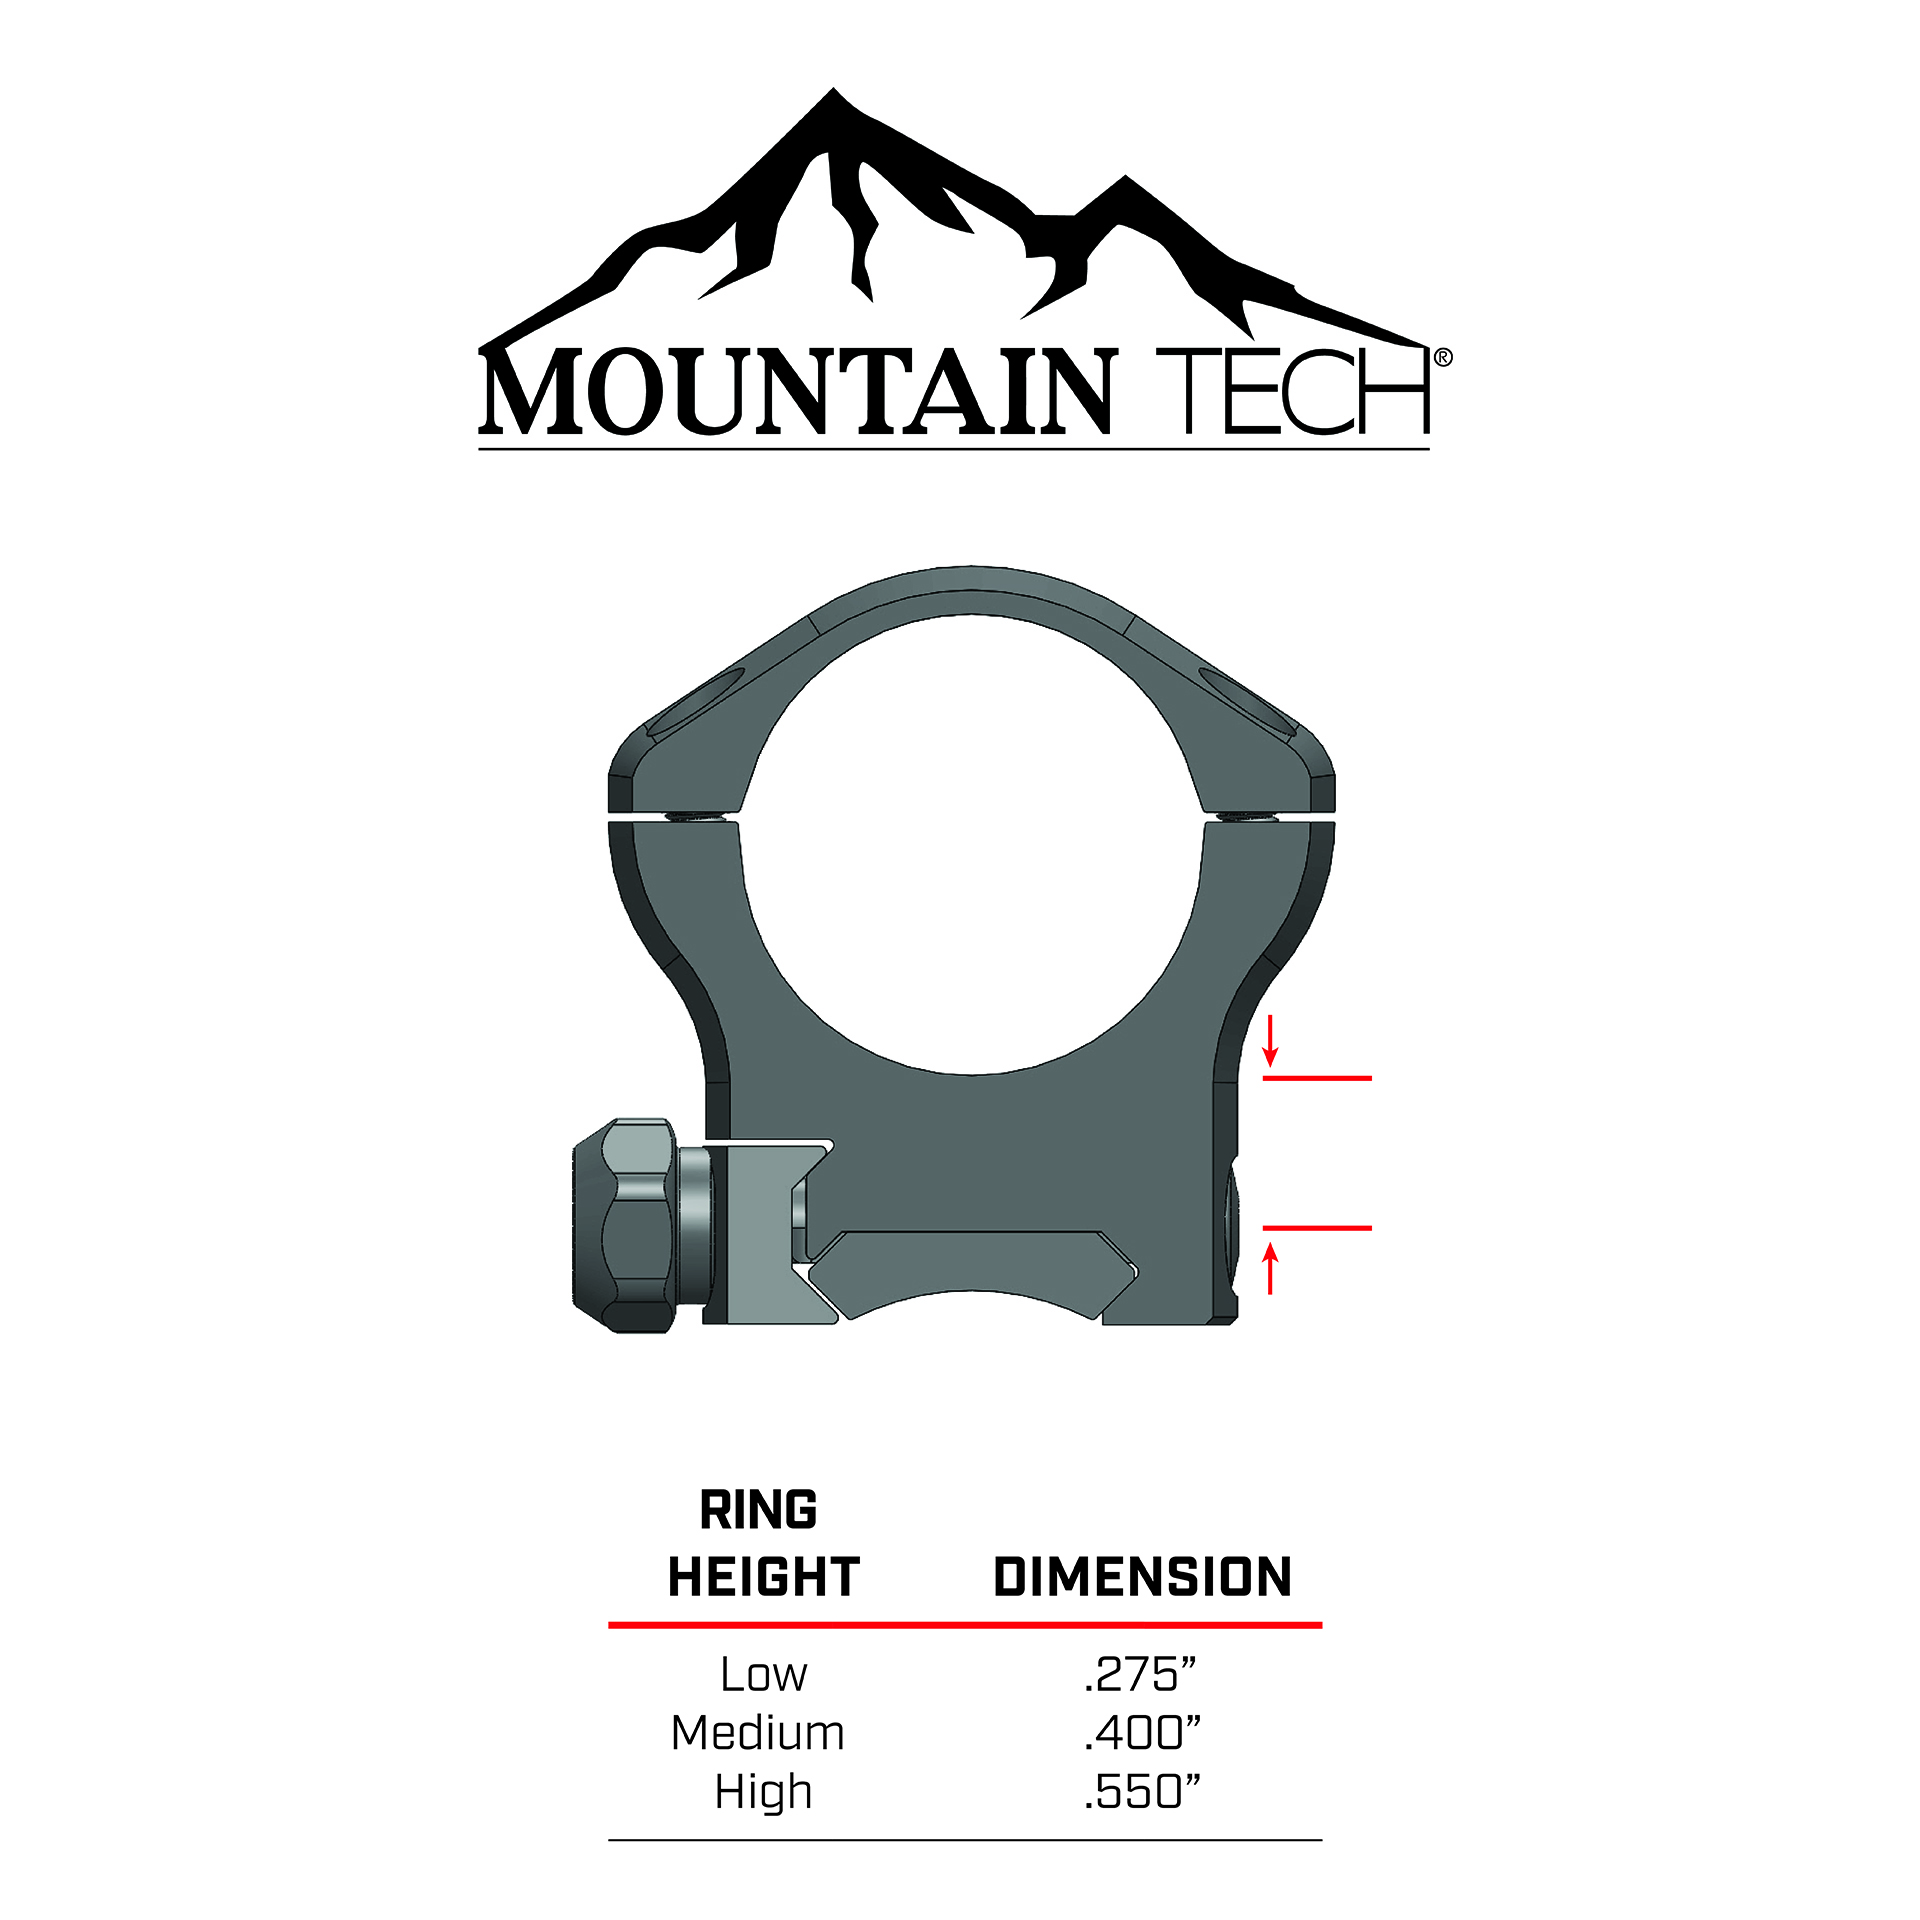 height for mountain tech scope rings. low .275 inch, med.400 inch, high .550 inch